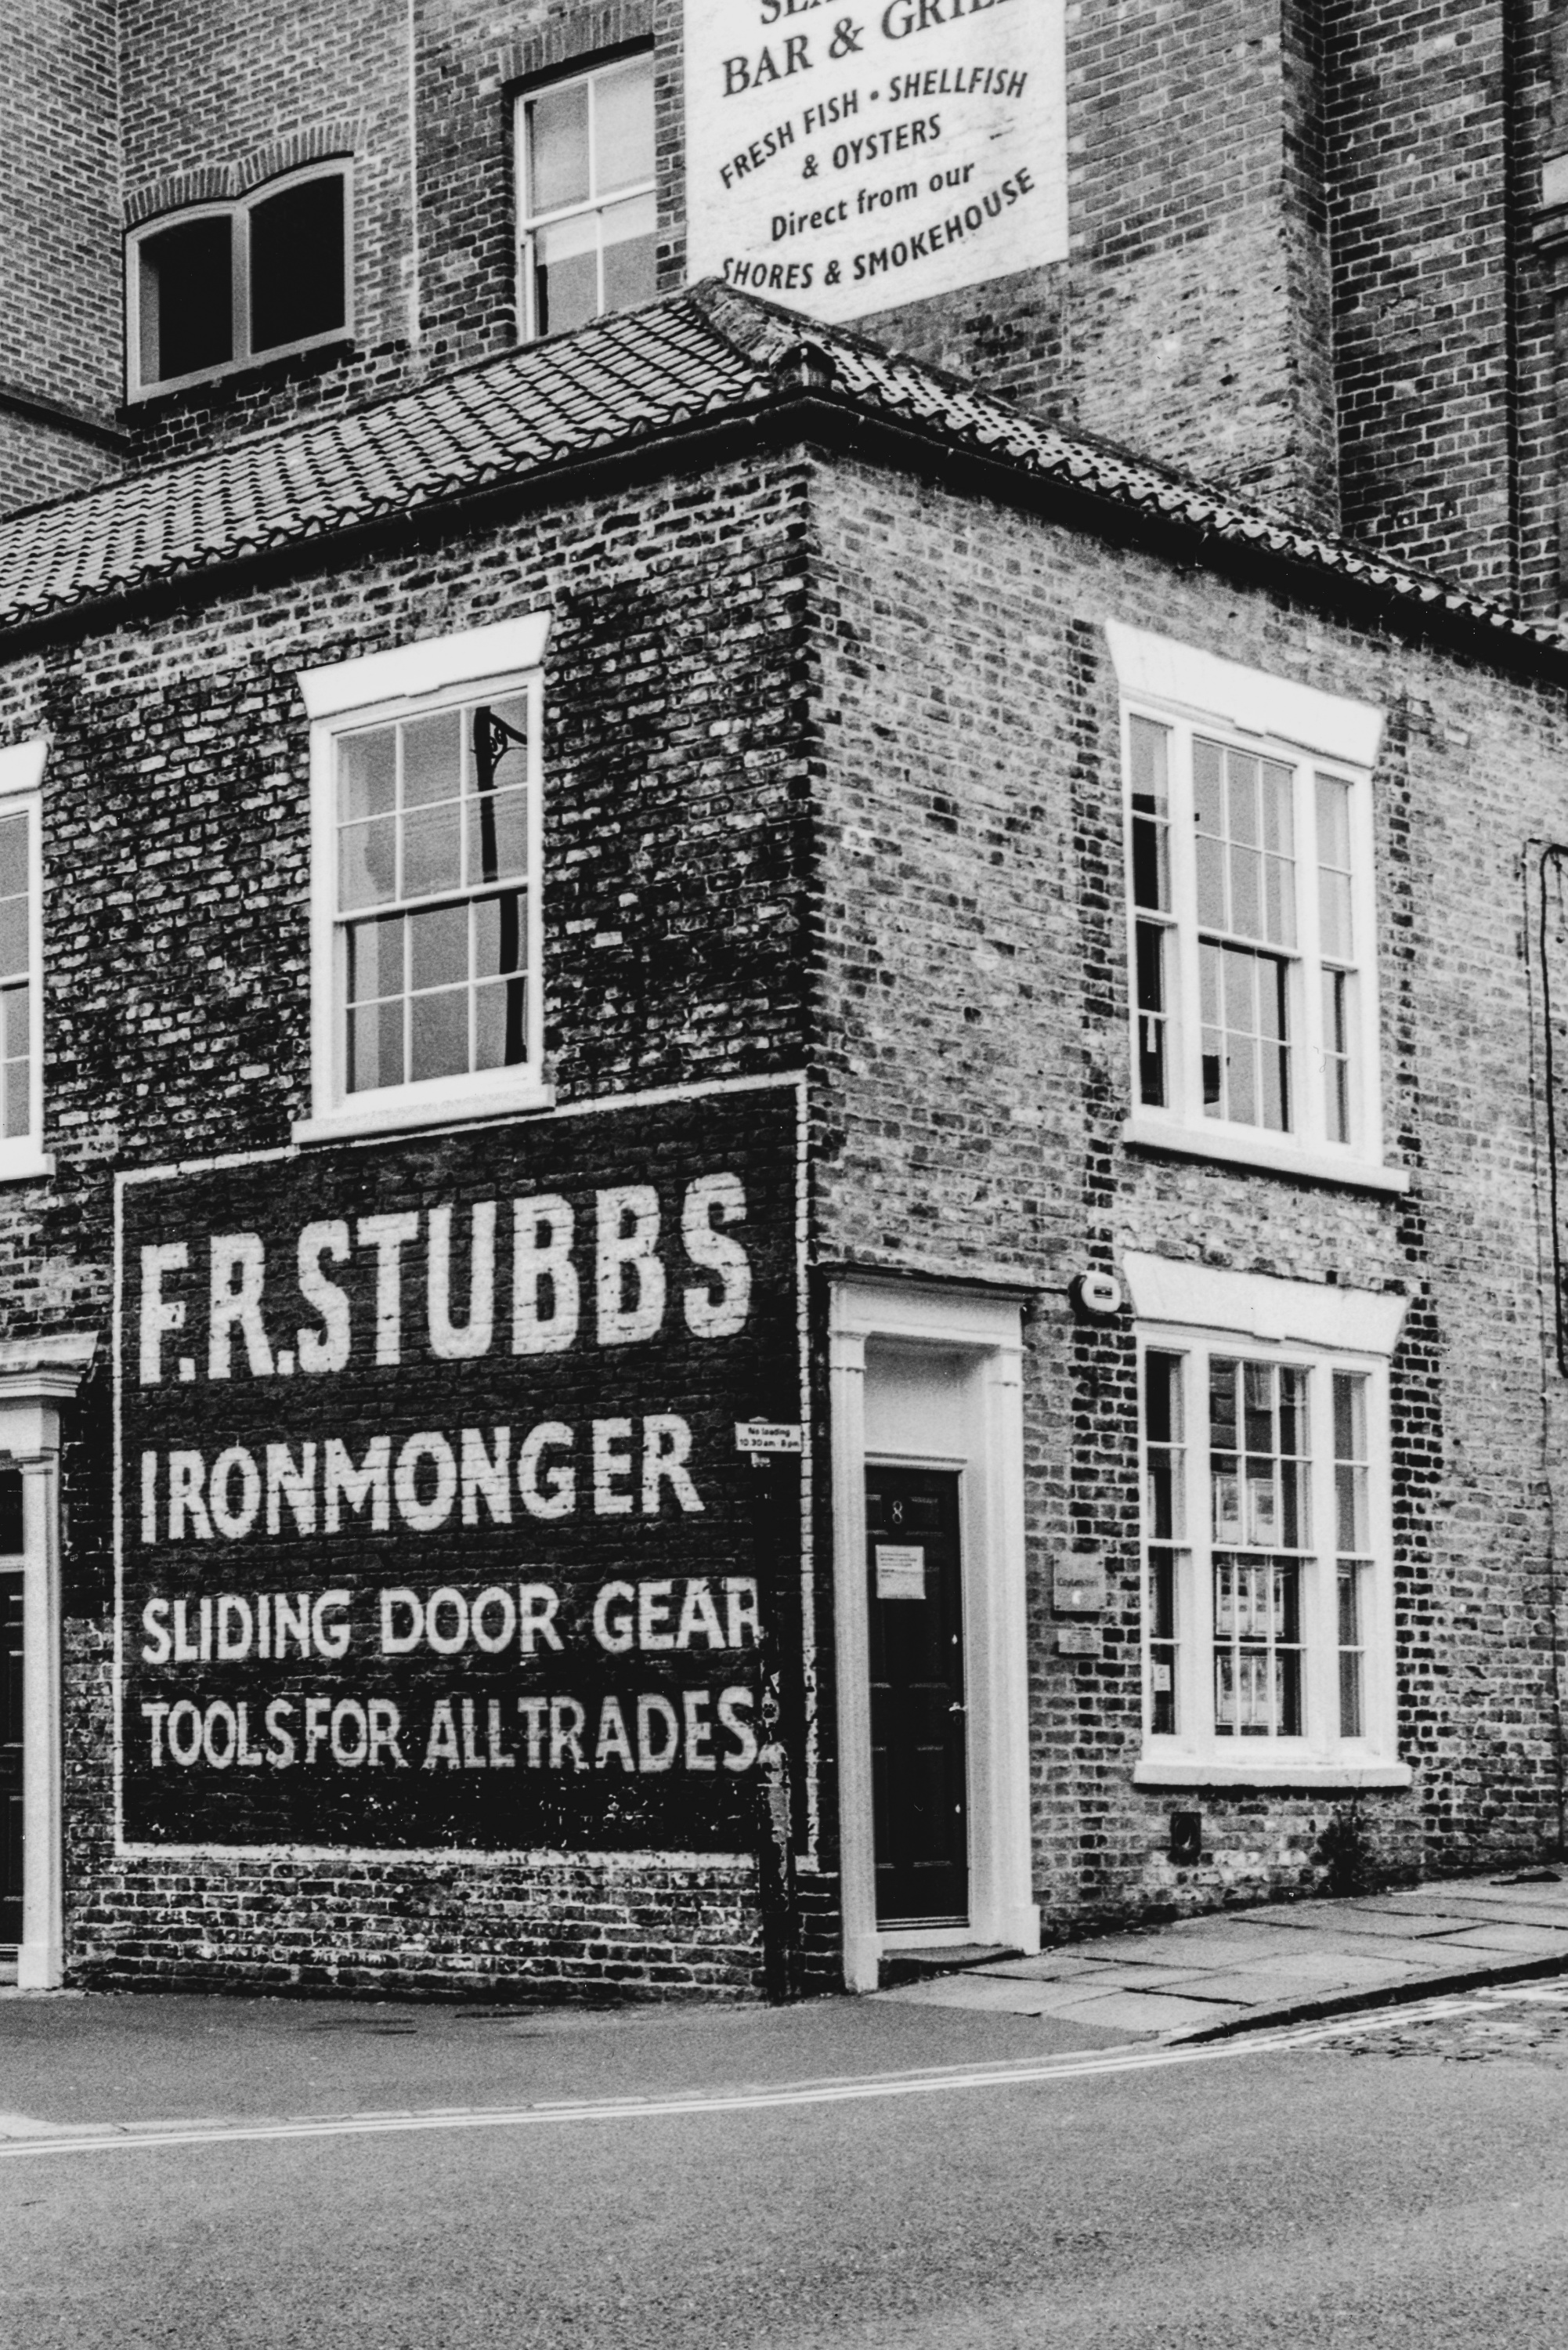 A black and white photograph of the exterior of a brick building. A painted sign with a dark background and white lettering reads: "F.R. STUBBS; IRONMONGER; SLIDING DOOR GEAR; TOOLS FOR ALL TRADES"